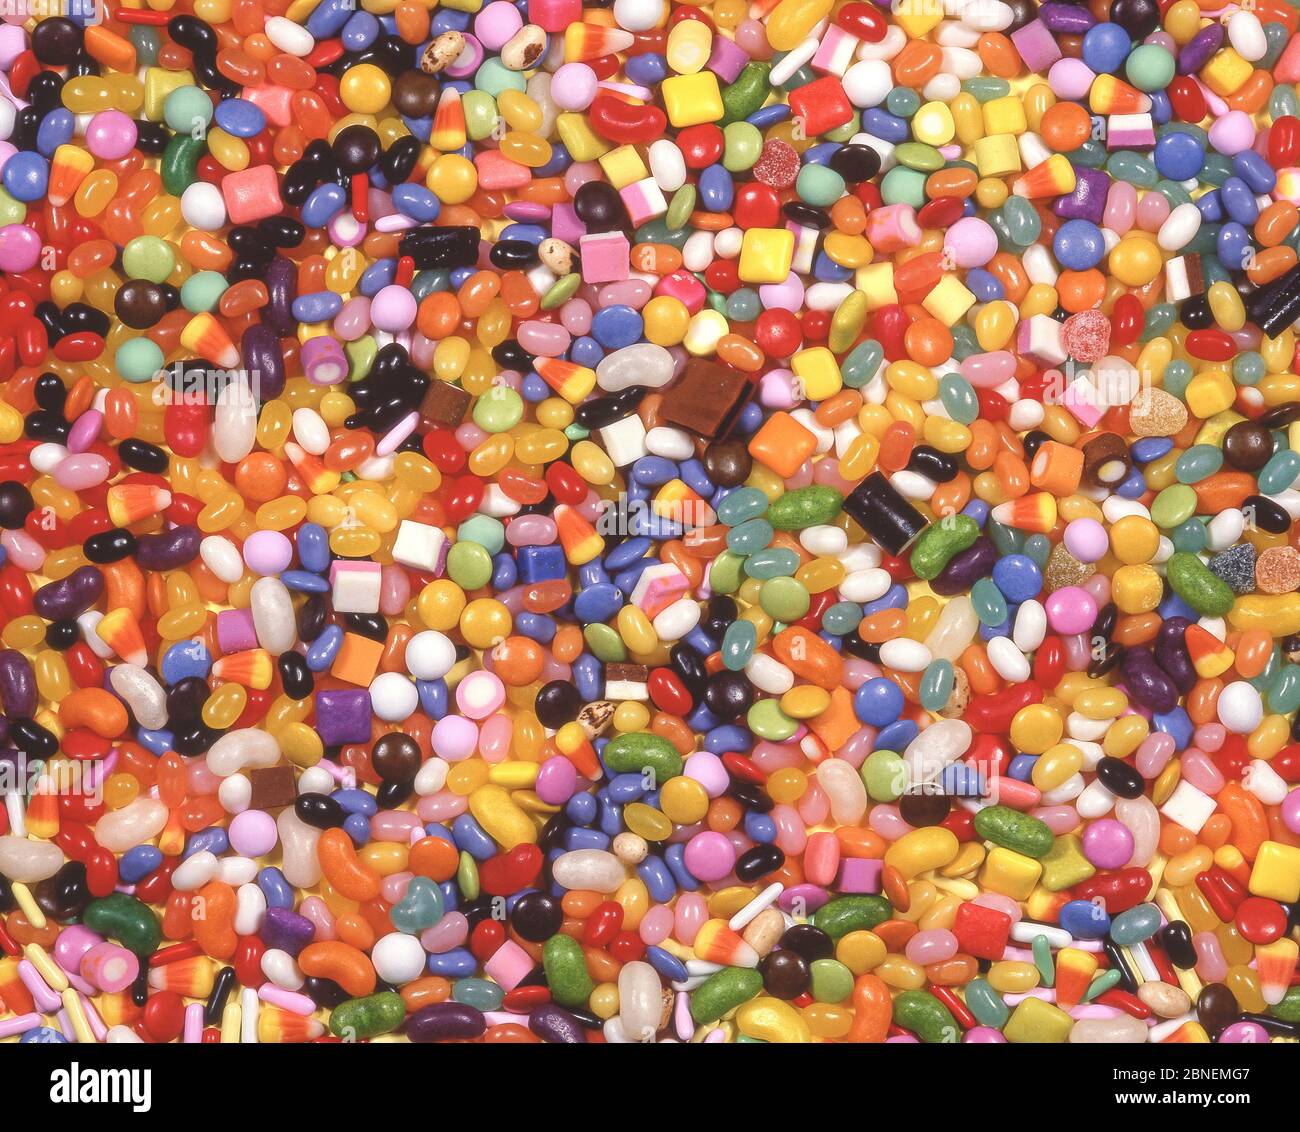 Jelly beans and dolly mixture sweet display, Greater London, England, United Kingdom Stock Photo